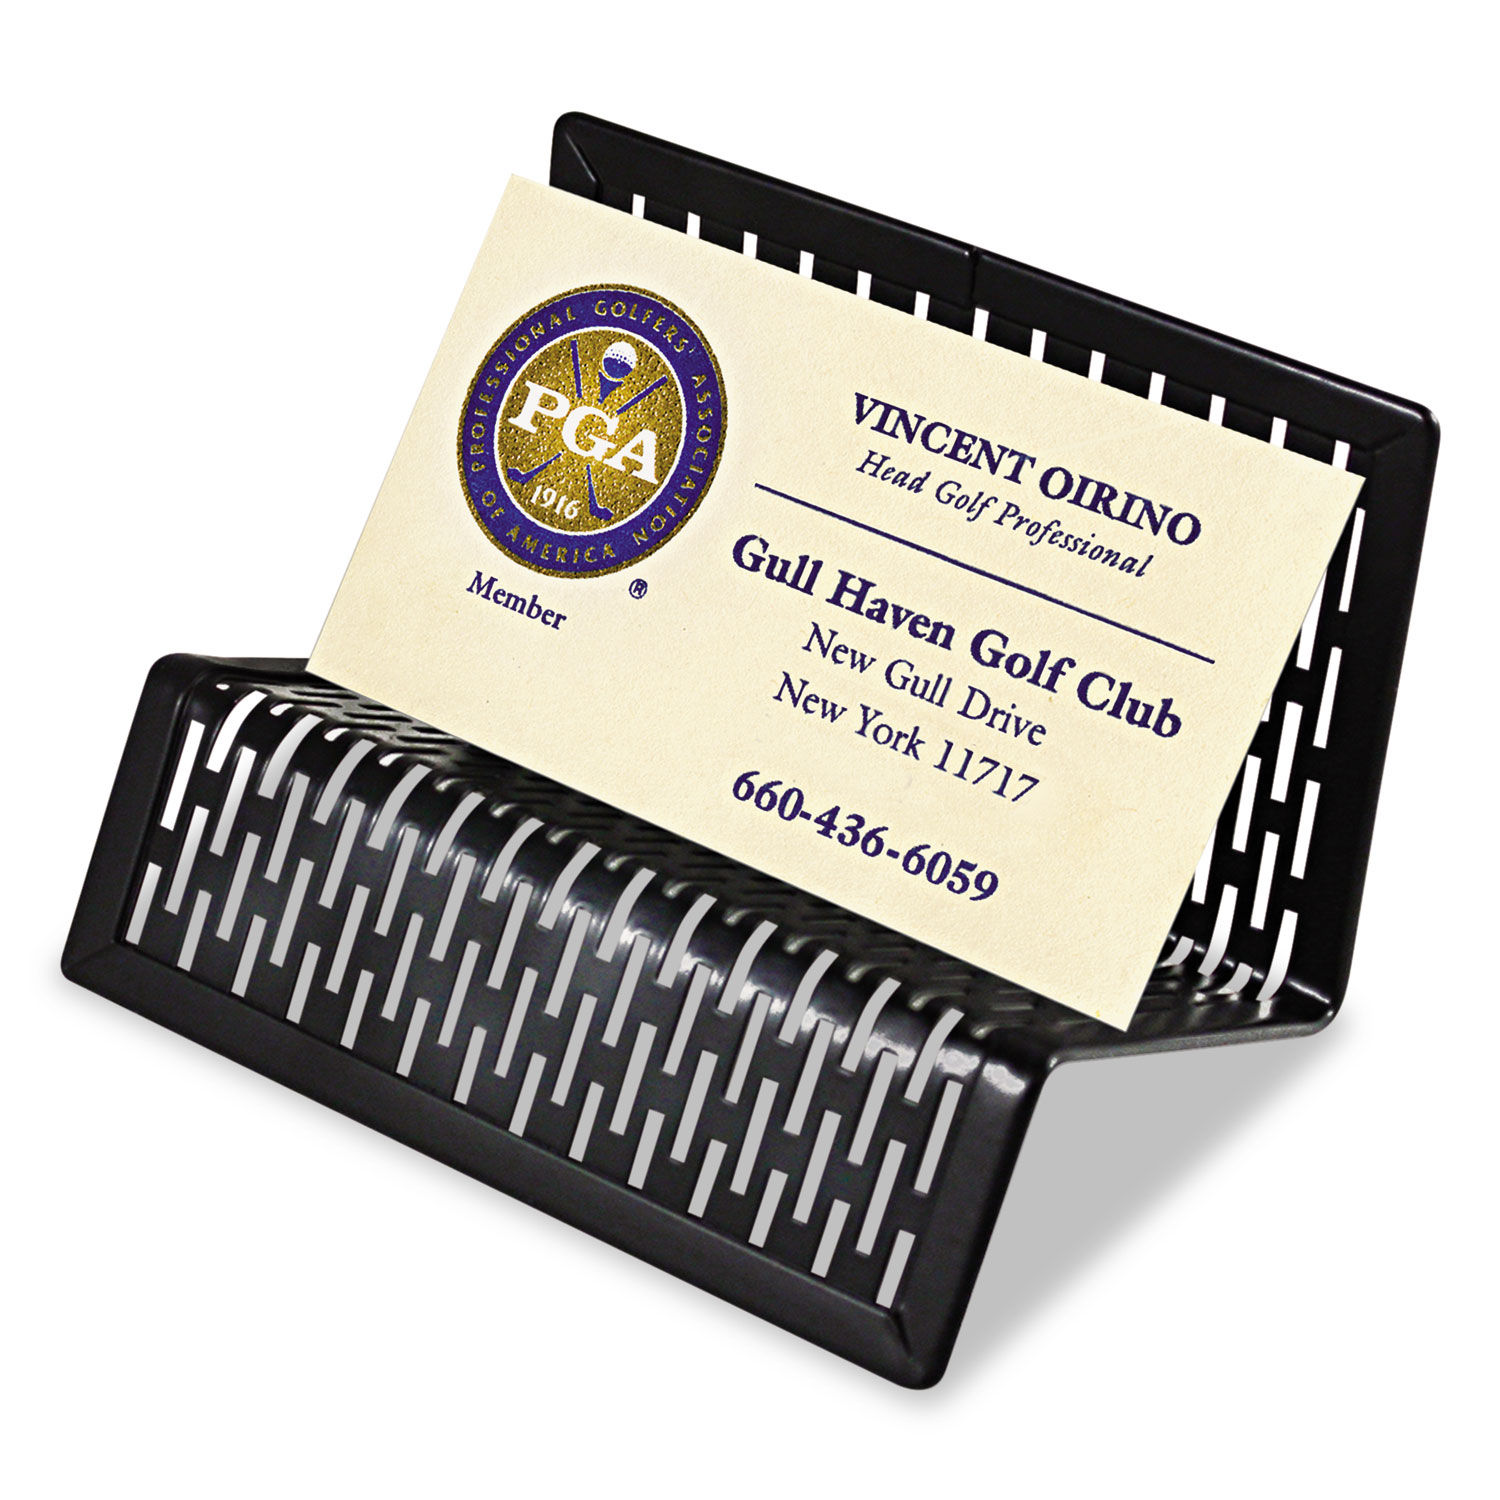 Urban Collection Punched Metal Business Card Holder Holds 50 2 x 3.5 Cards, Perforated Steel, Black